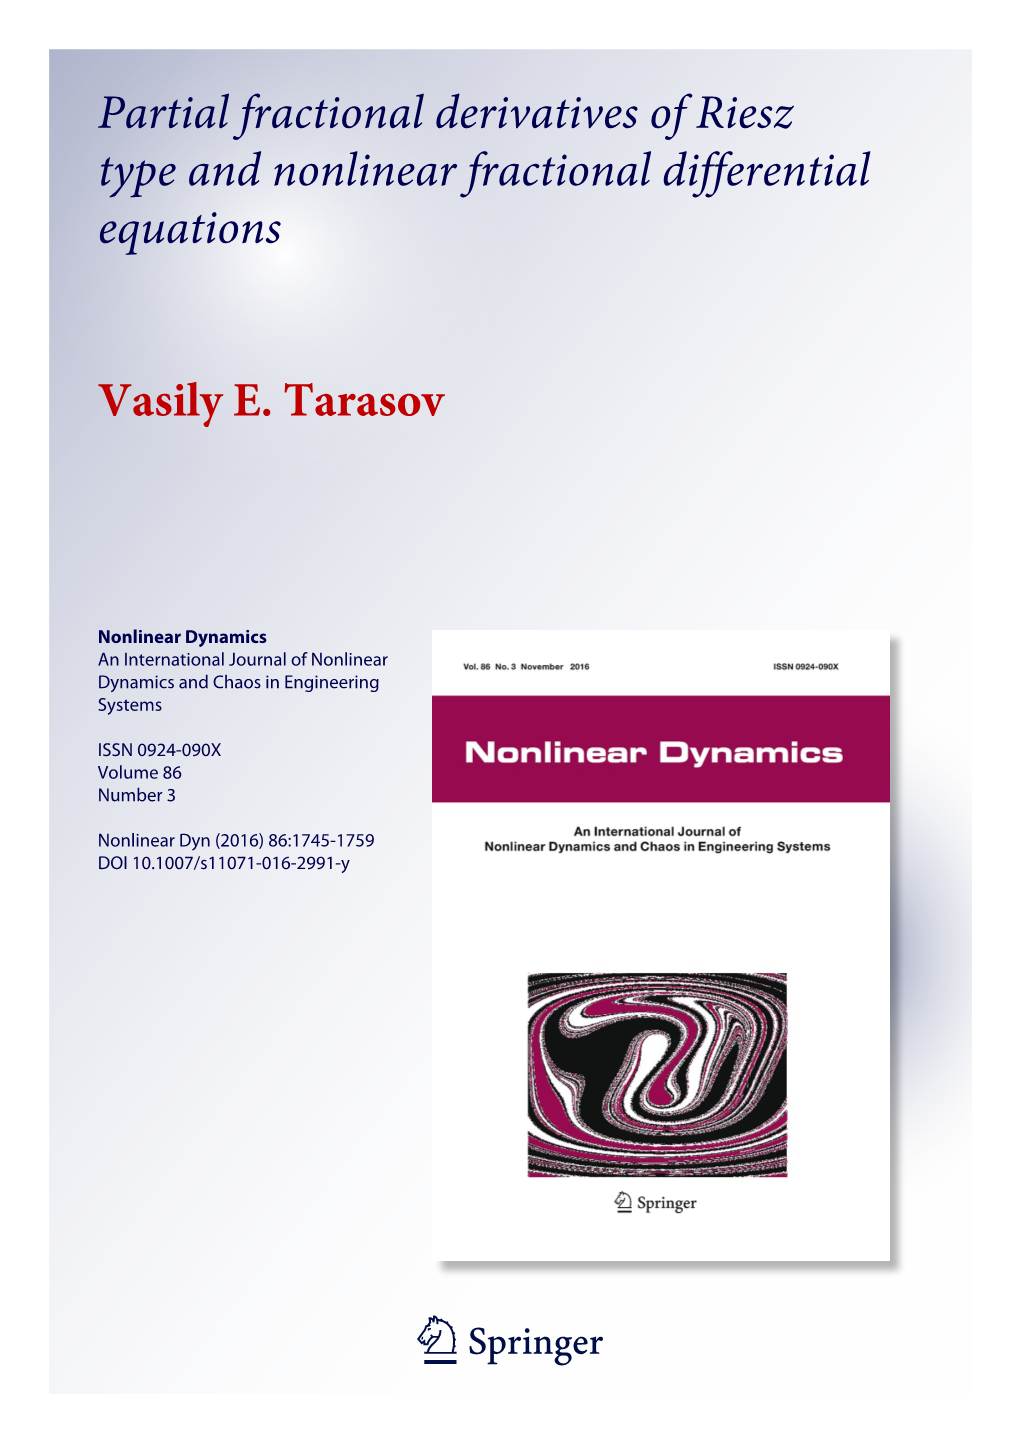 Partial Fractional Derivatives of Riesz Type and Nonlinear Fractional Differential Equations